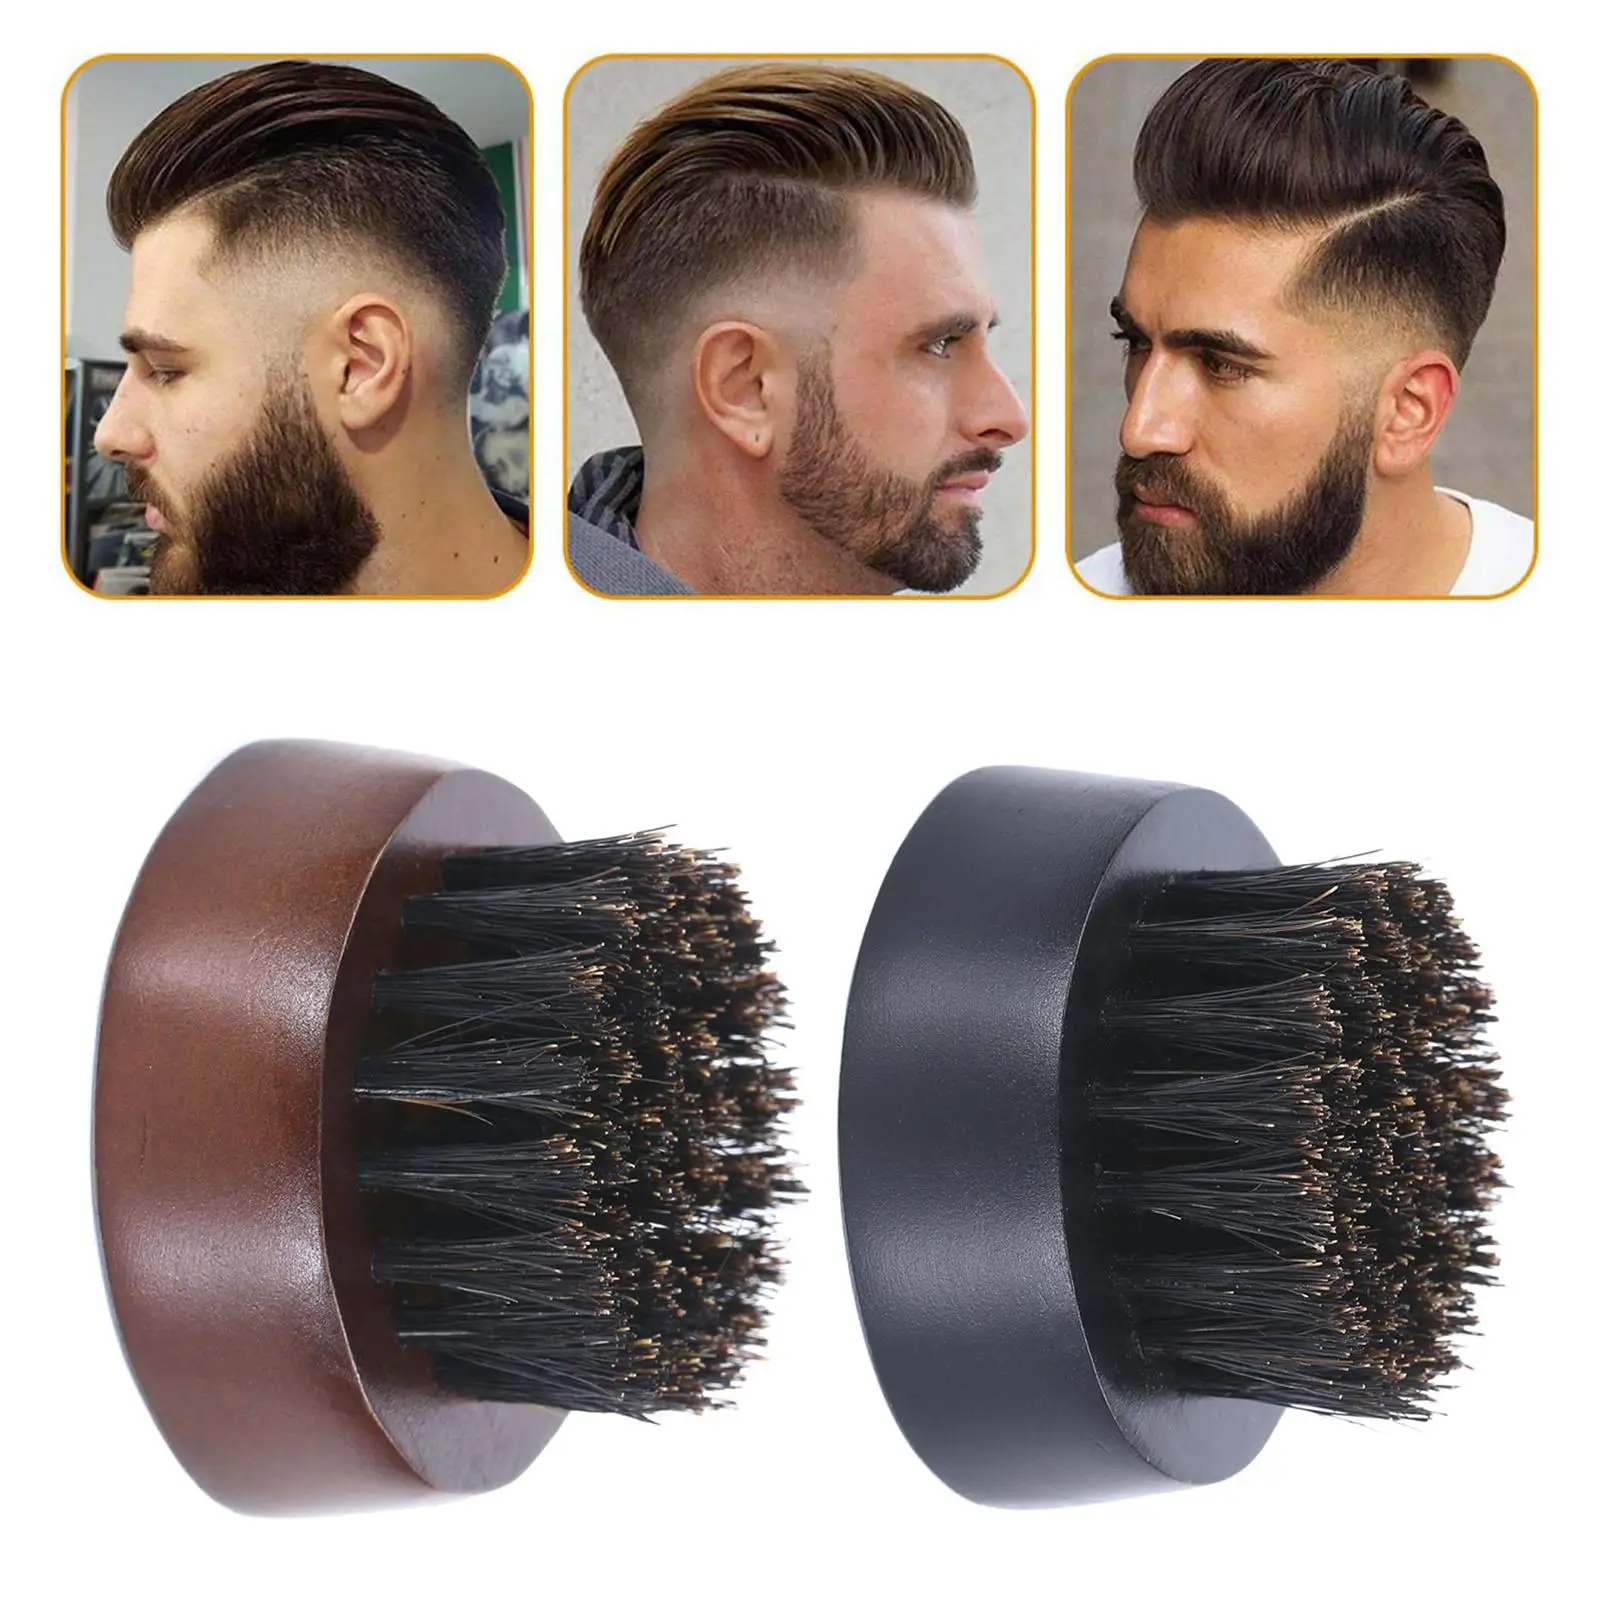 Wooden Beard Brush Boars Tame Hair Styling Tools for Conditioning